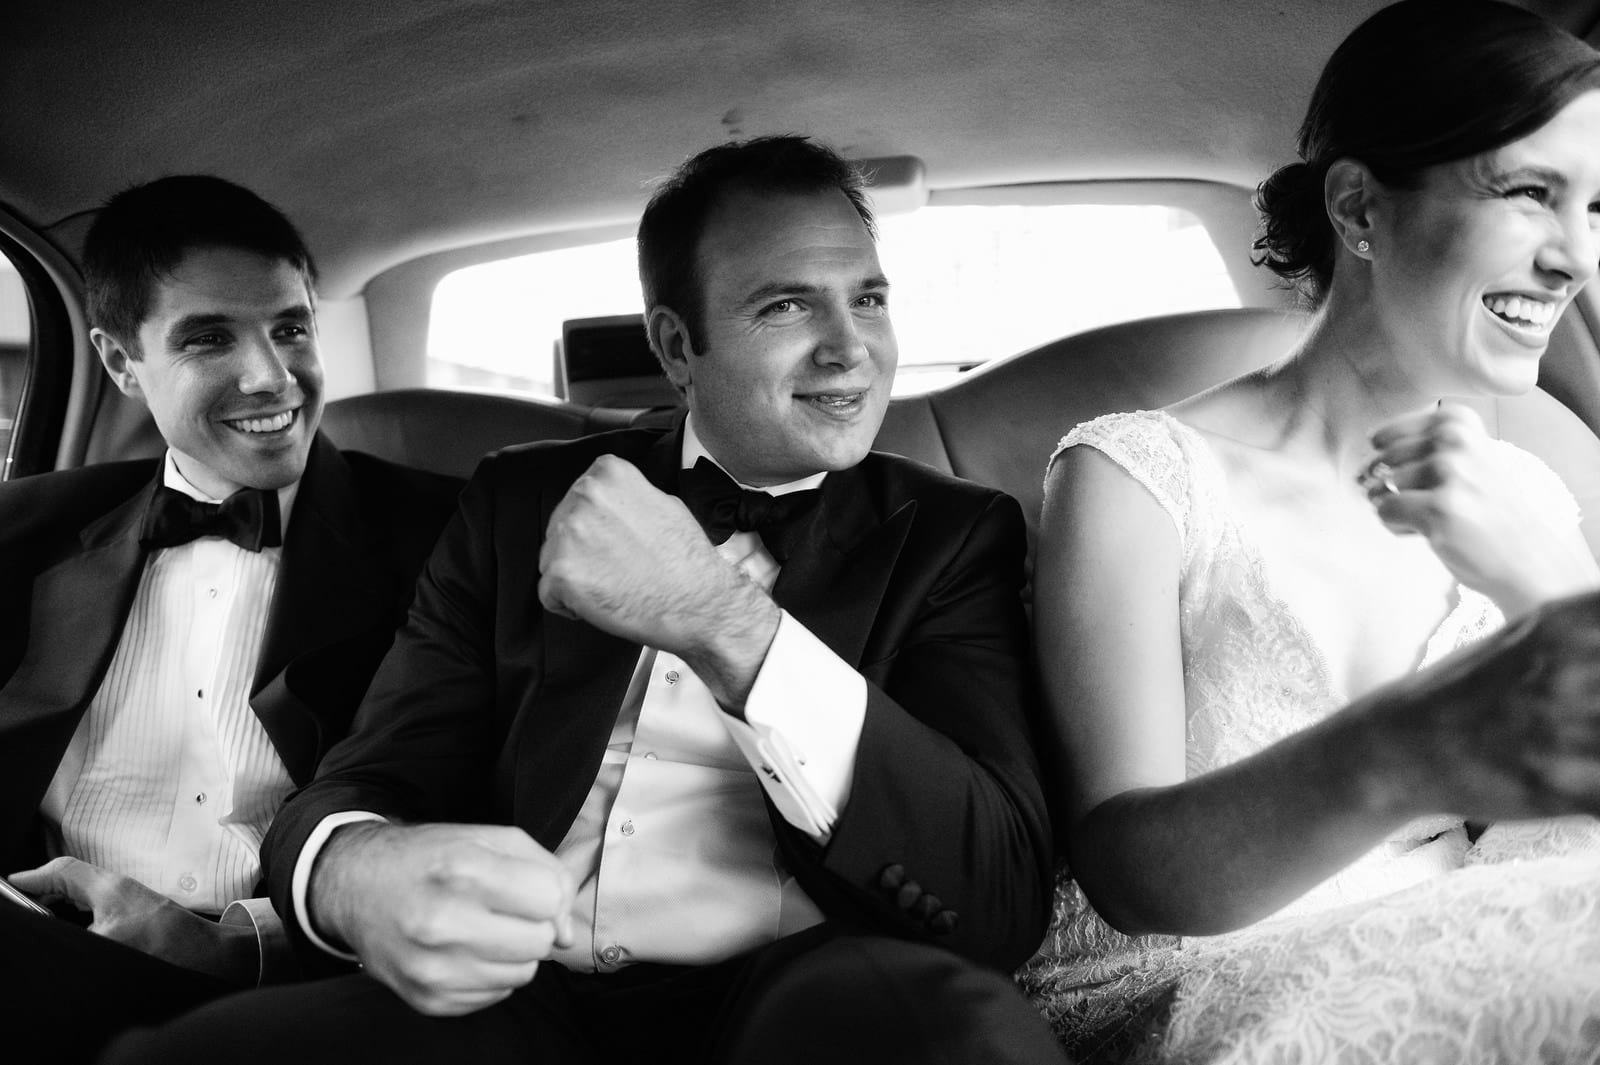 A groom smiles and holds his fist up while seated in the back of a limousine with his bride and her brother before their wedding at the Pittsburgh Center for the Arts.